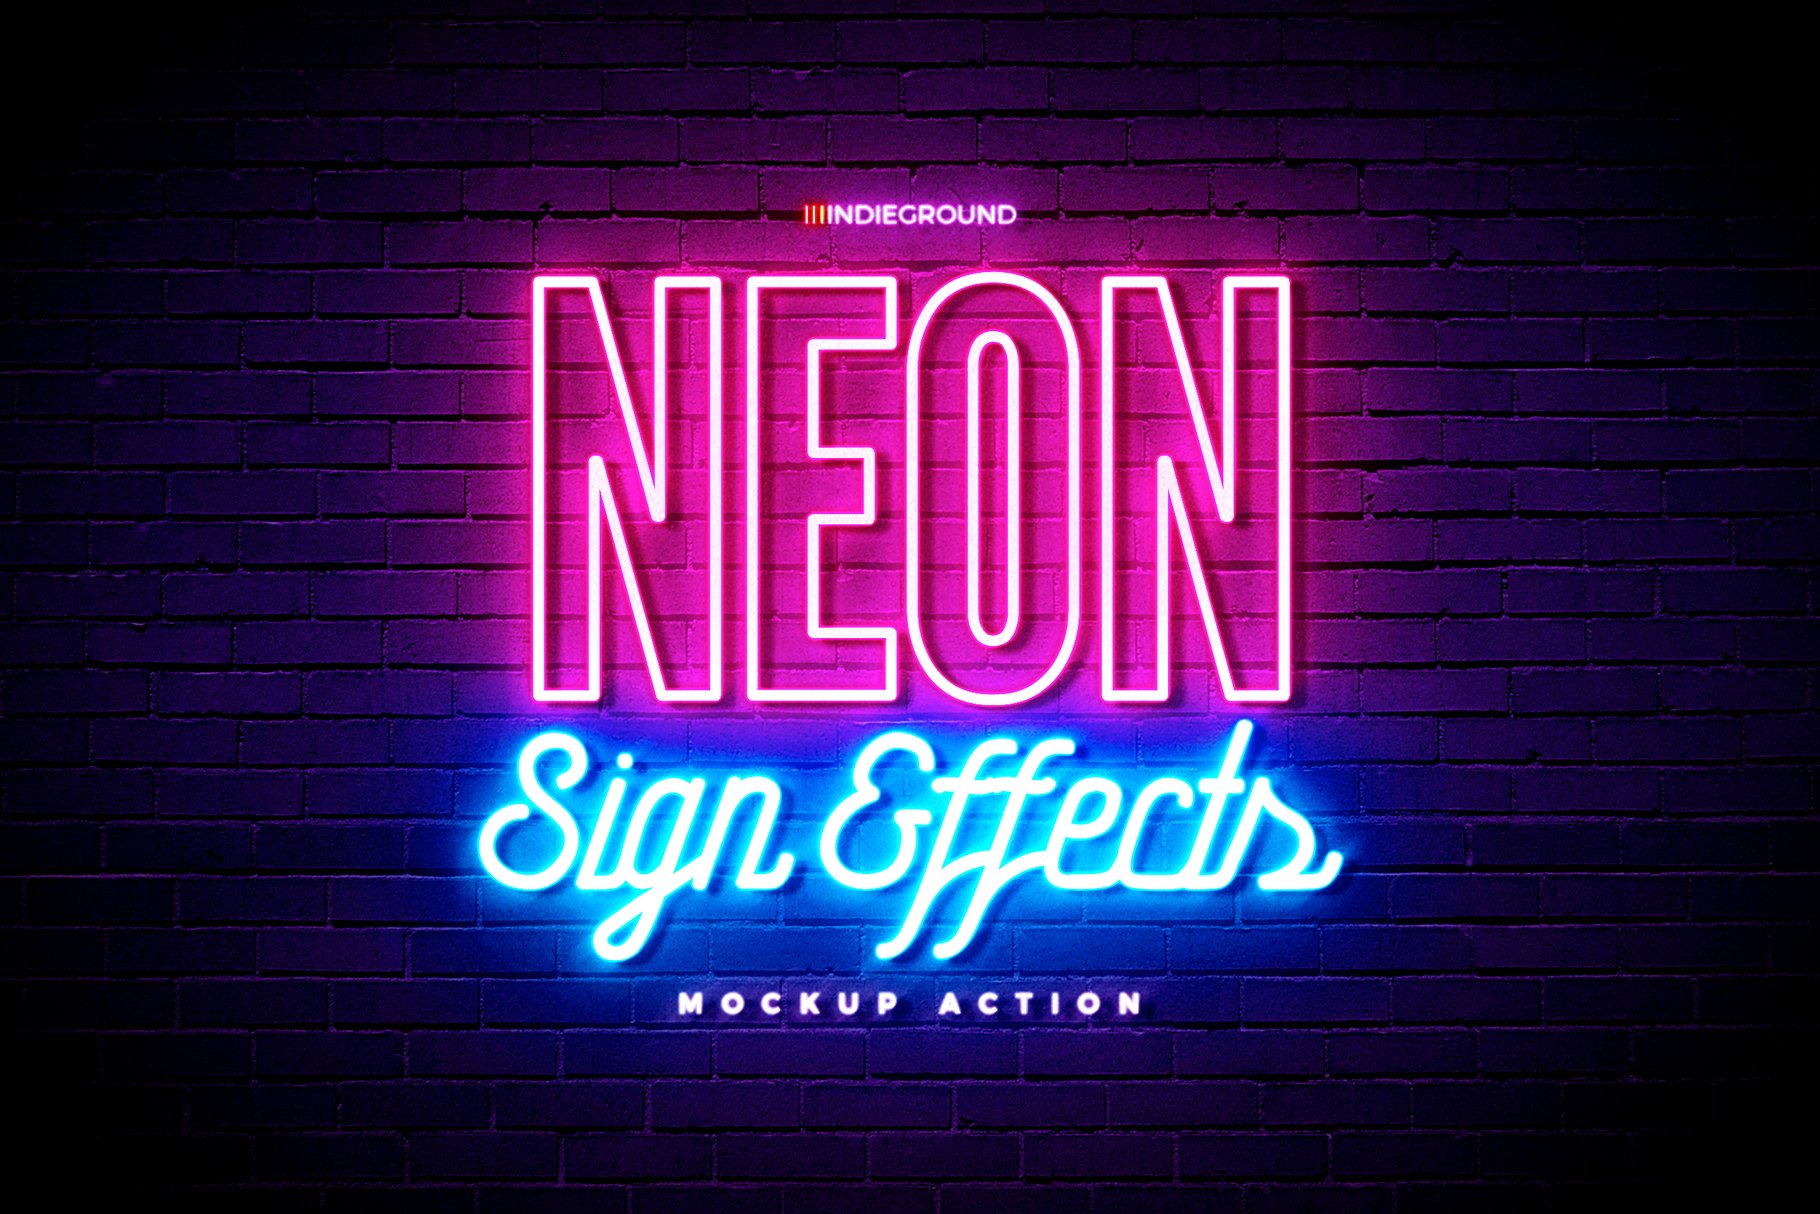 Neon Sign Effectscover image.